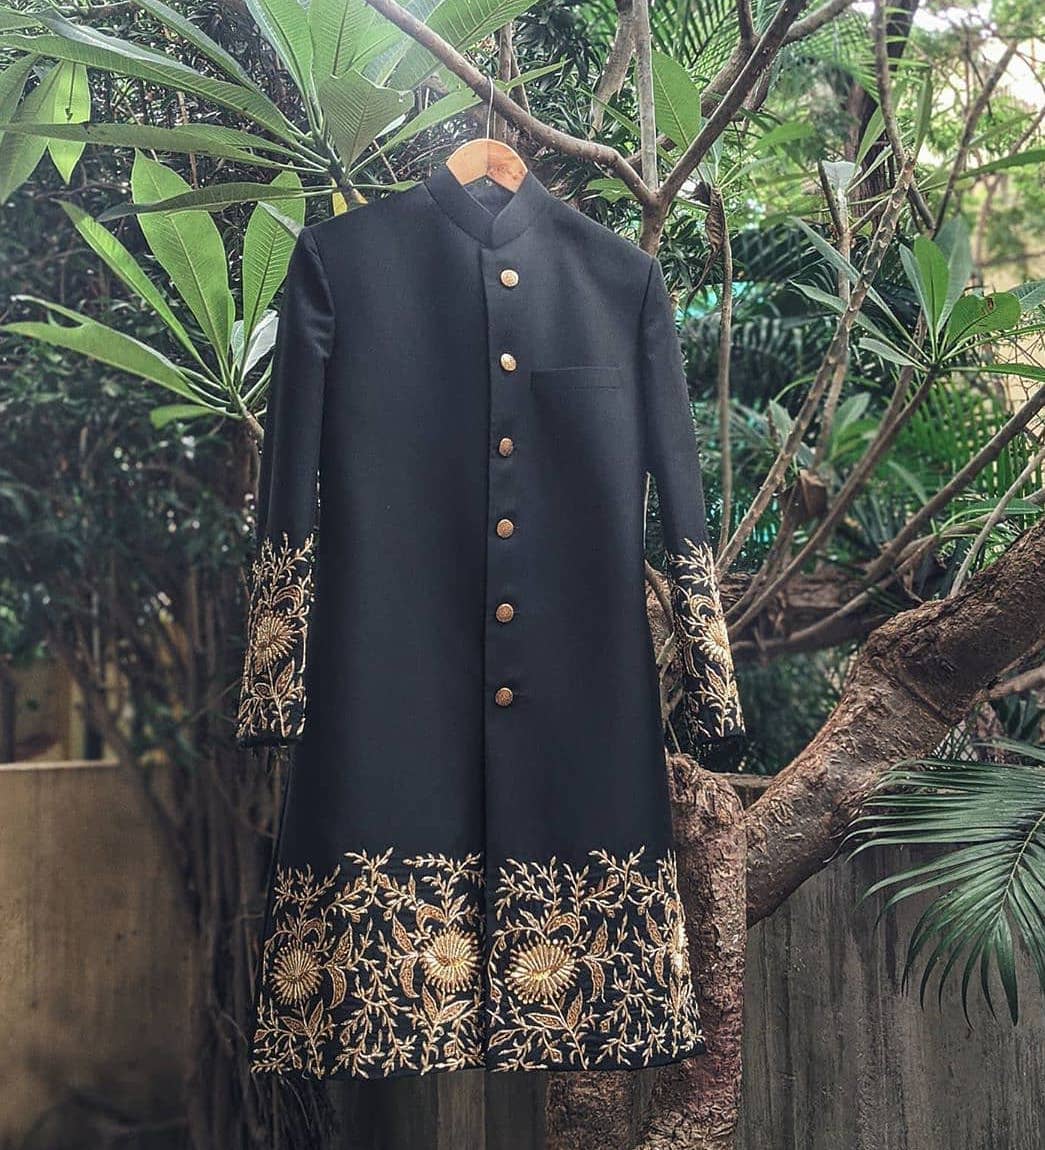 Black sherwani with golden embroidery work on sleeves and lower hem